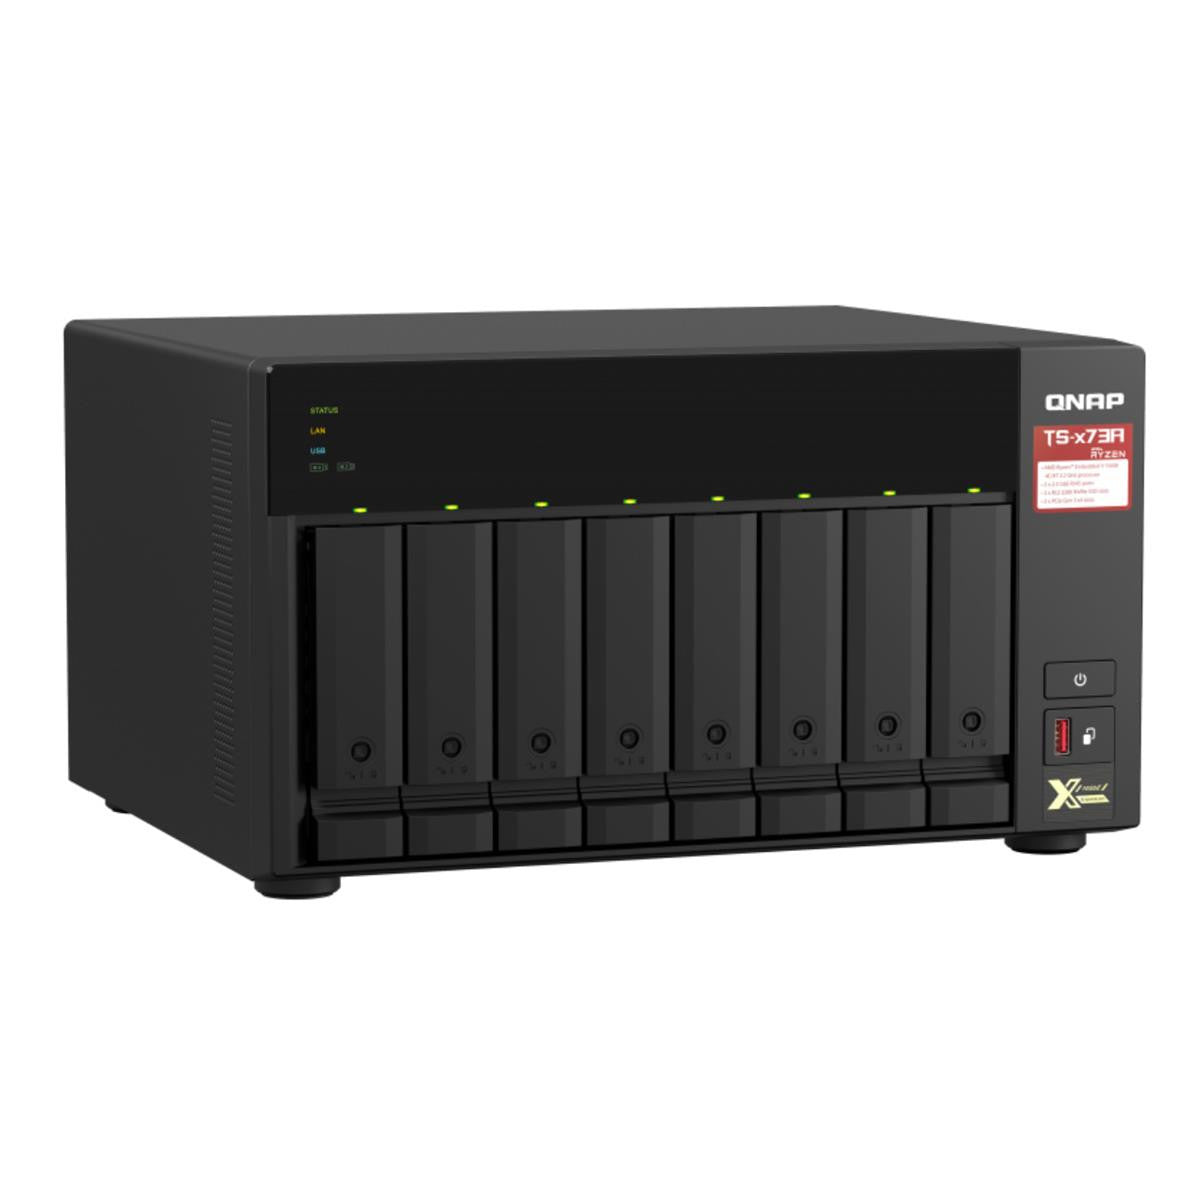 QNAP TS-873A 8-BAY NAS with 8GB DDR4 RAM and 16TB (8x2TB) Seagate Ironwolf NAS Drives Fully Assembled and Tested